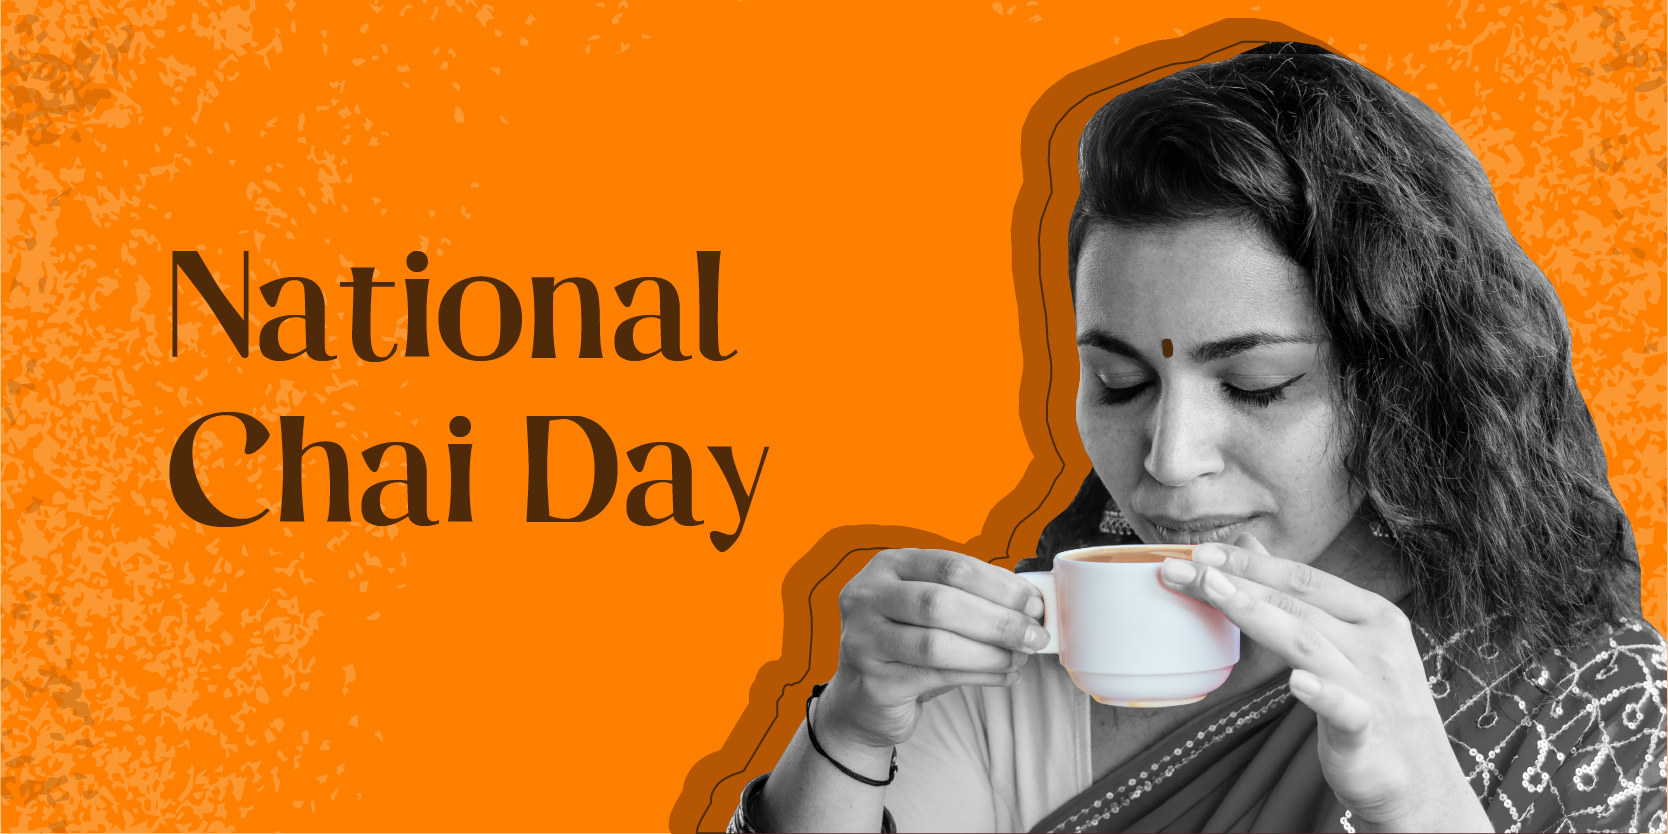 This National Chai Day, meet your favourite chai brands from across India